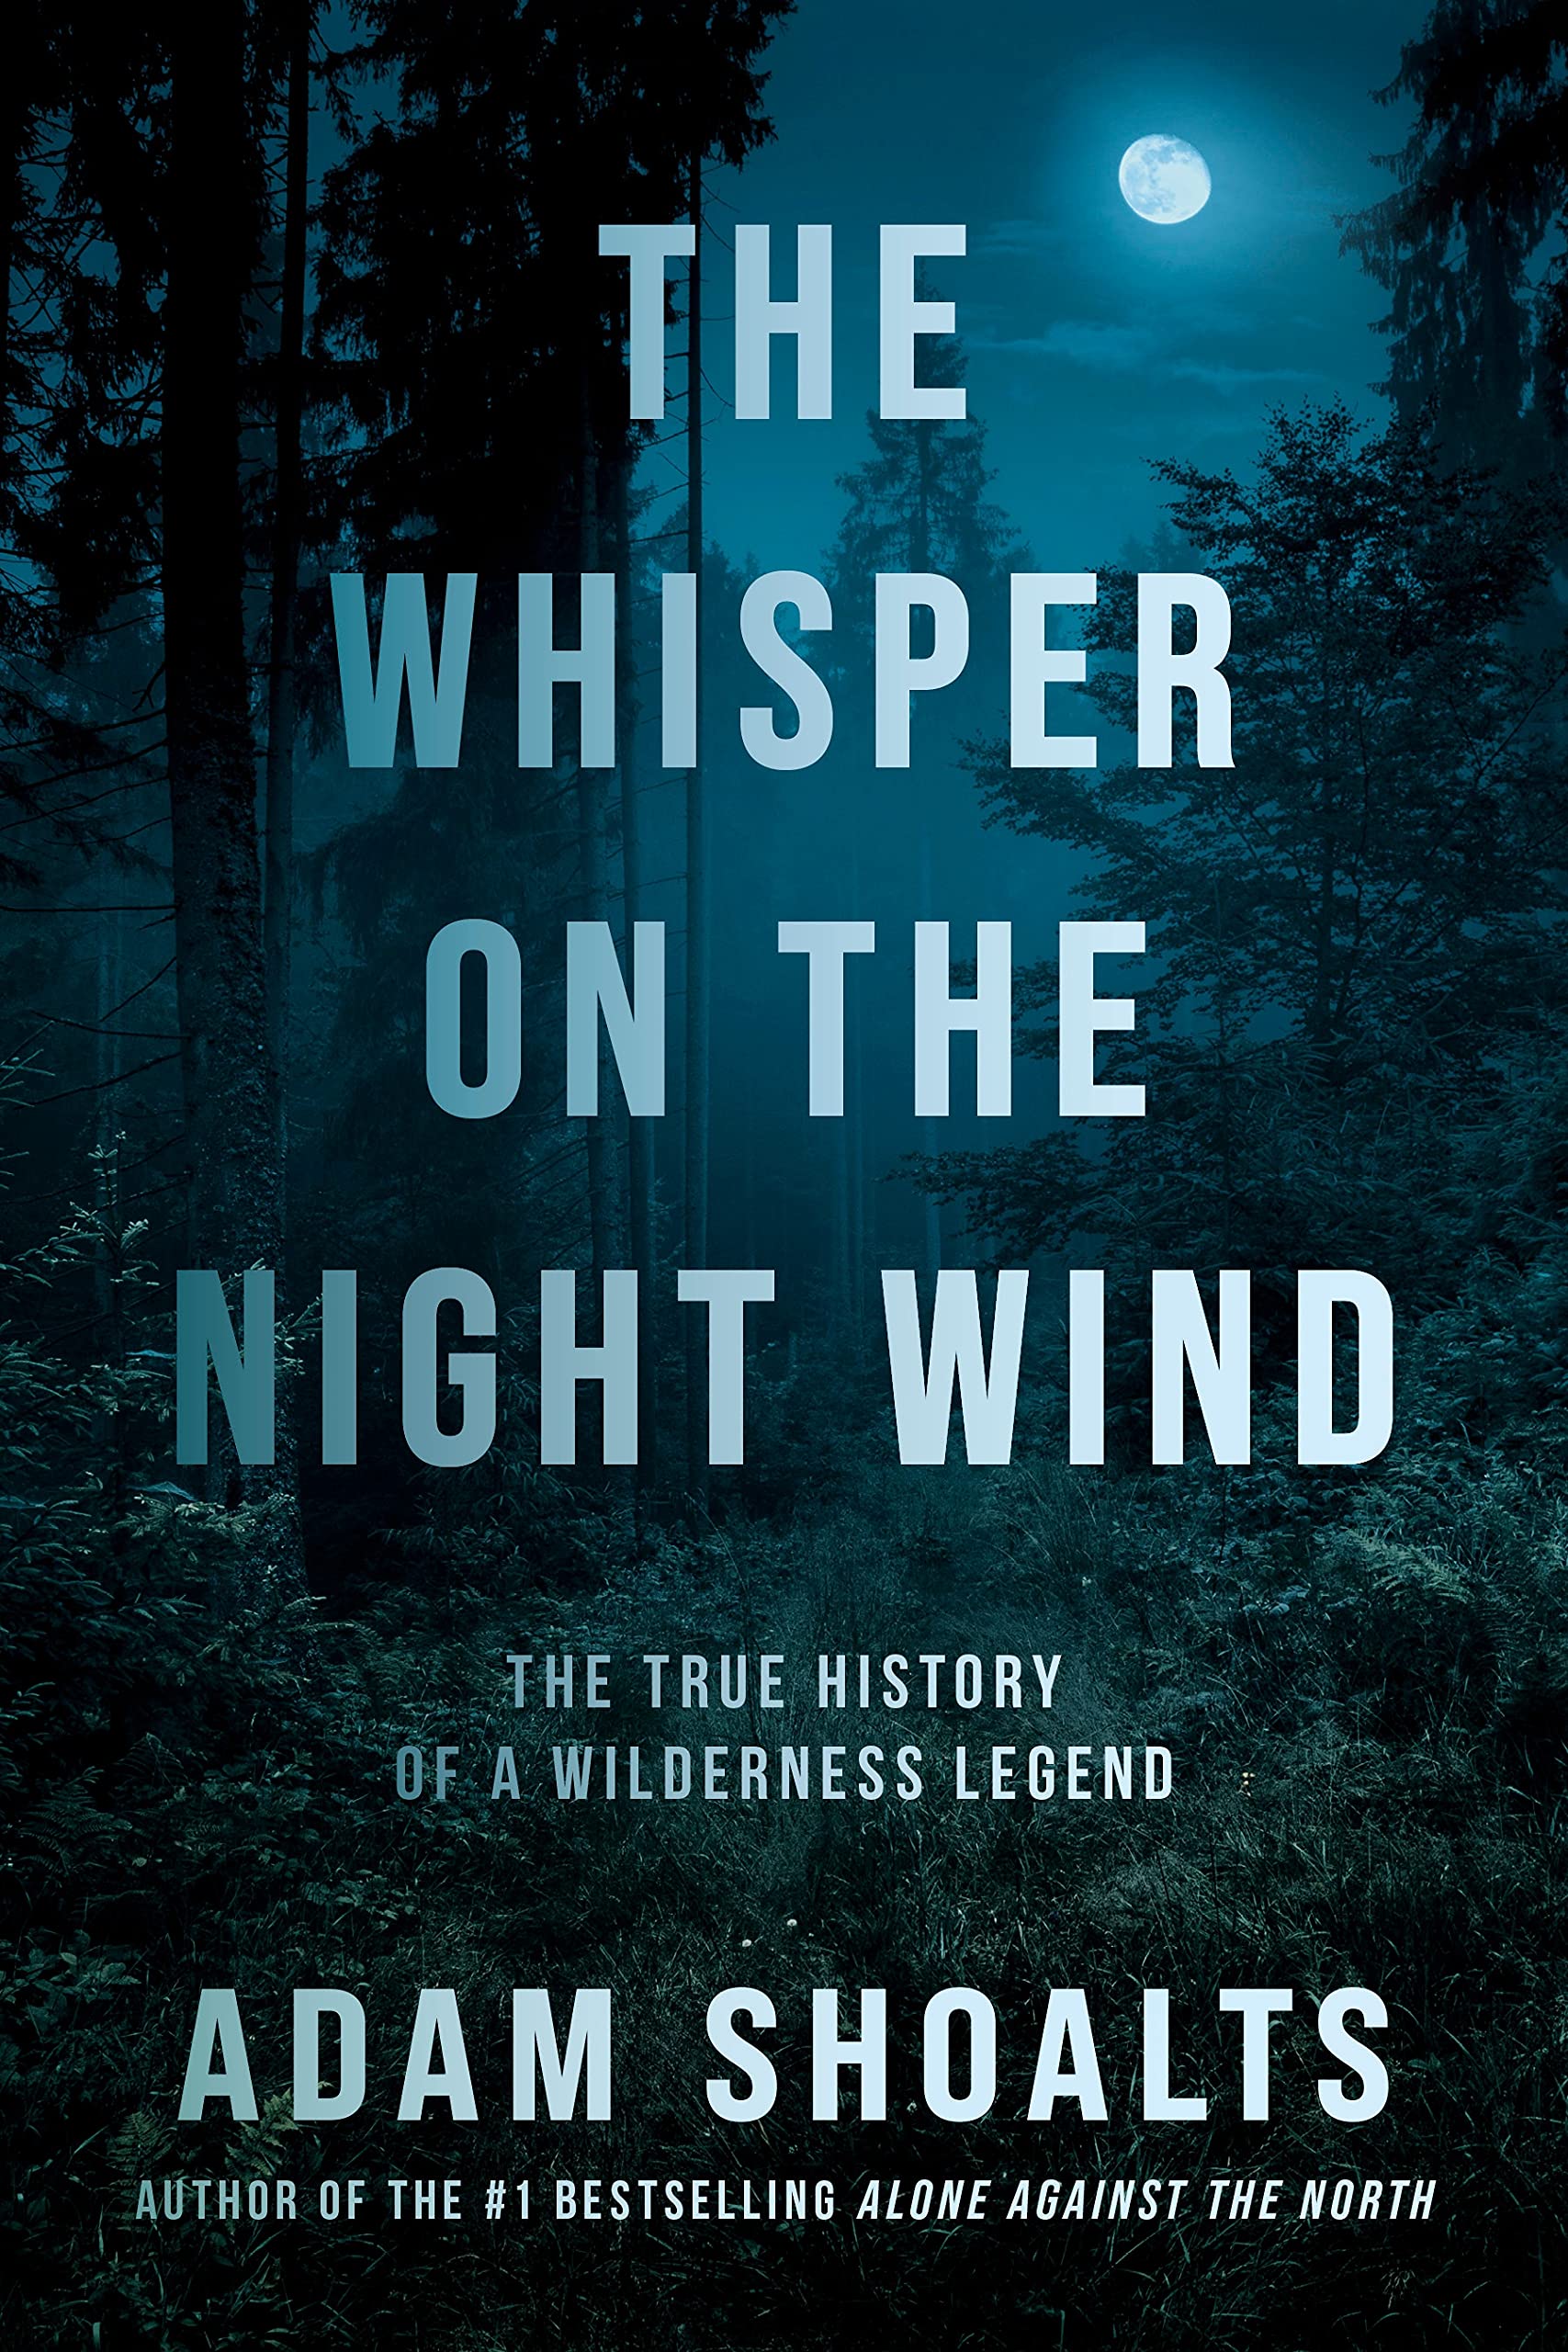 The Whisper on the Night Wind: The True History of a Wilderness Legend Hardcover by Adam Shoalts